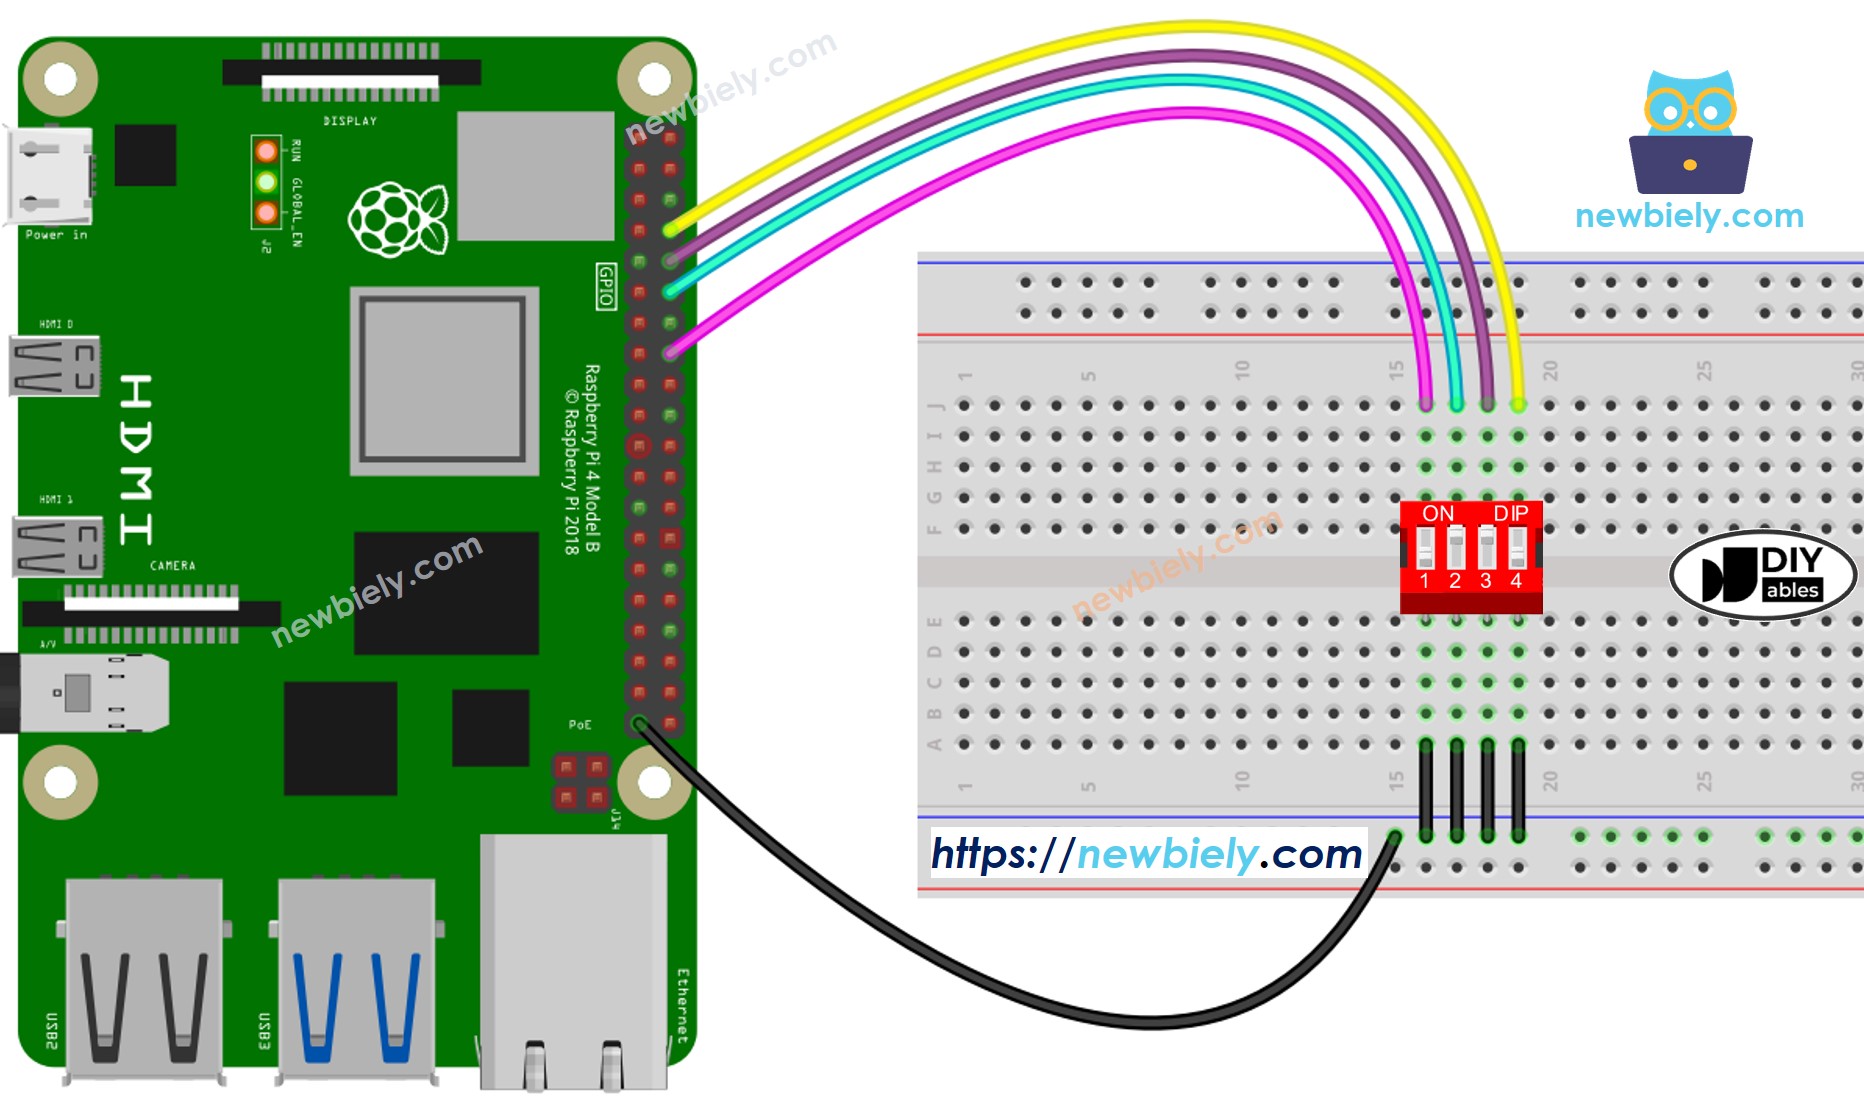 The wiring diagram between Raspberry Pi and DIP switch